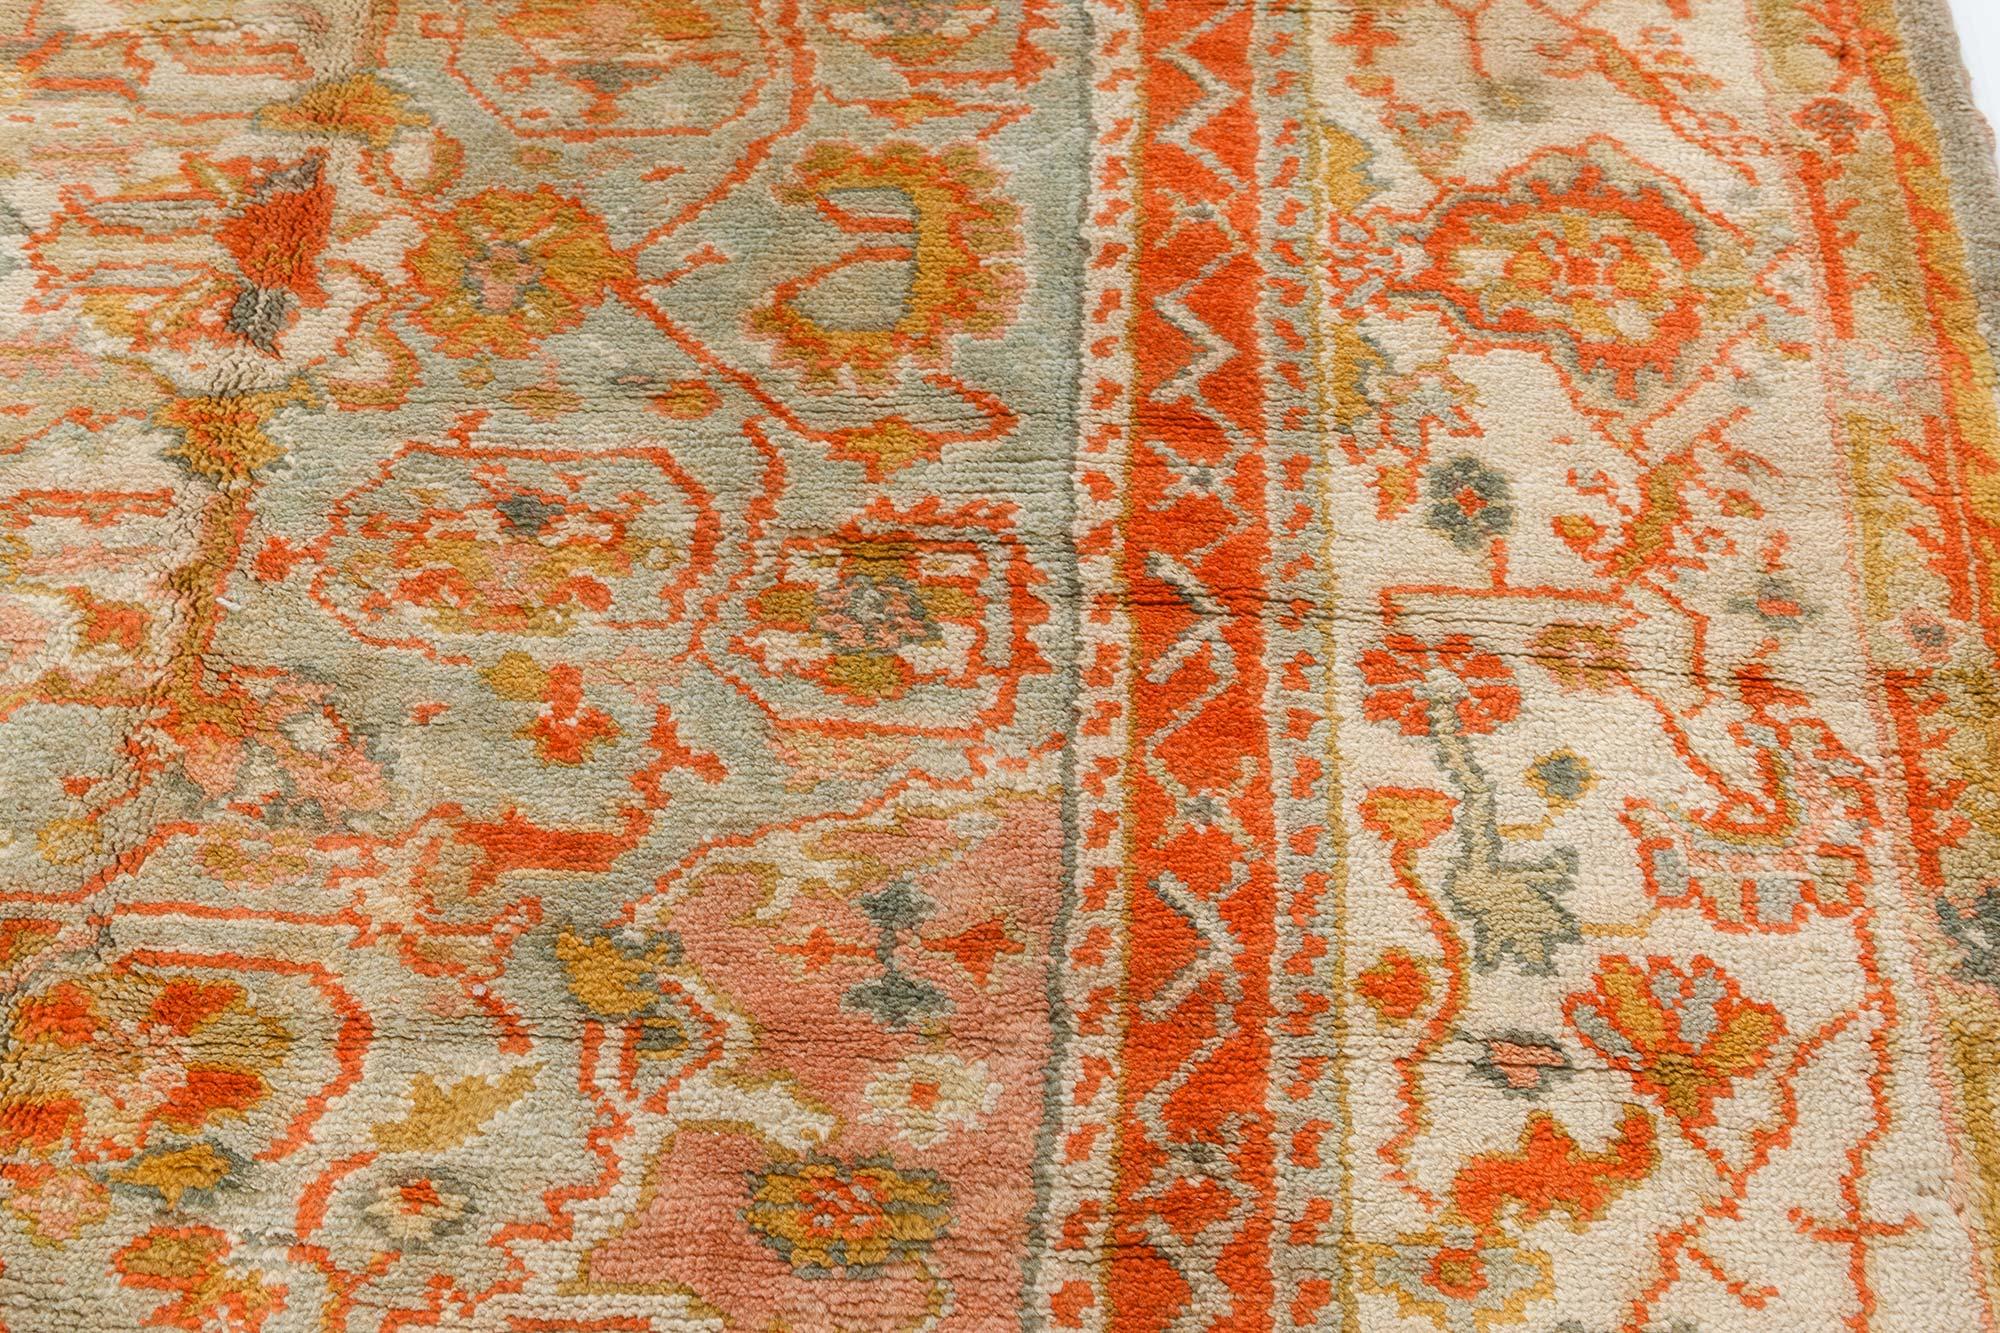 Antique Turkish Oushak Botanic Handmade Wool Carpet In Good Condition For Sale In New York, NY